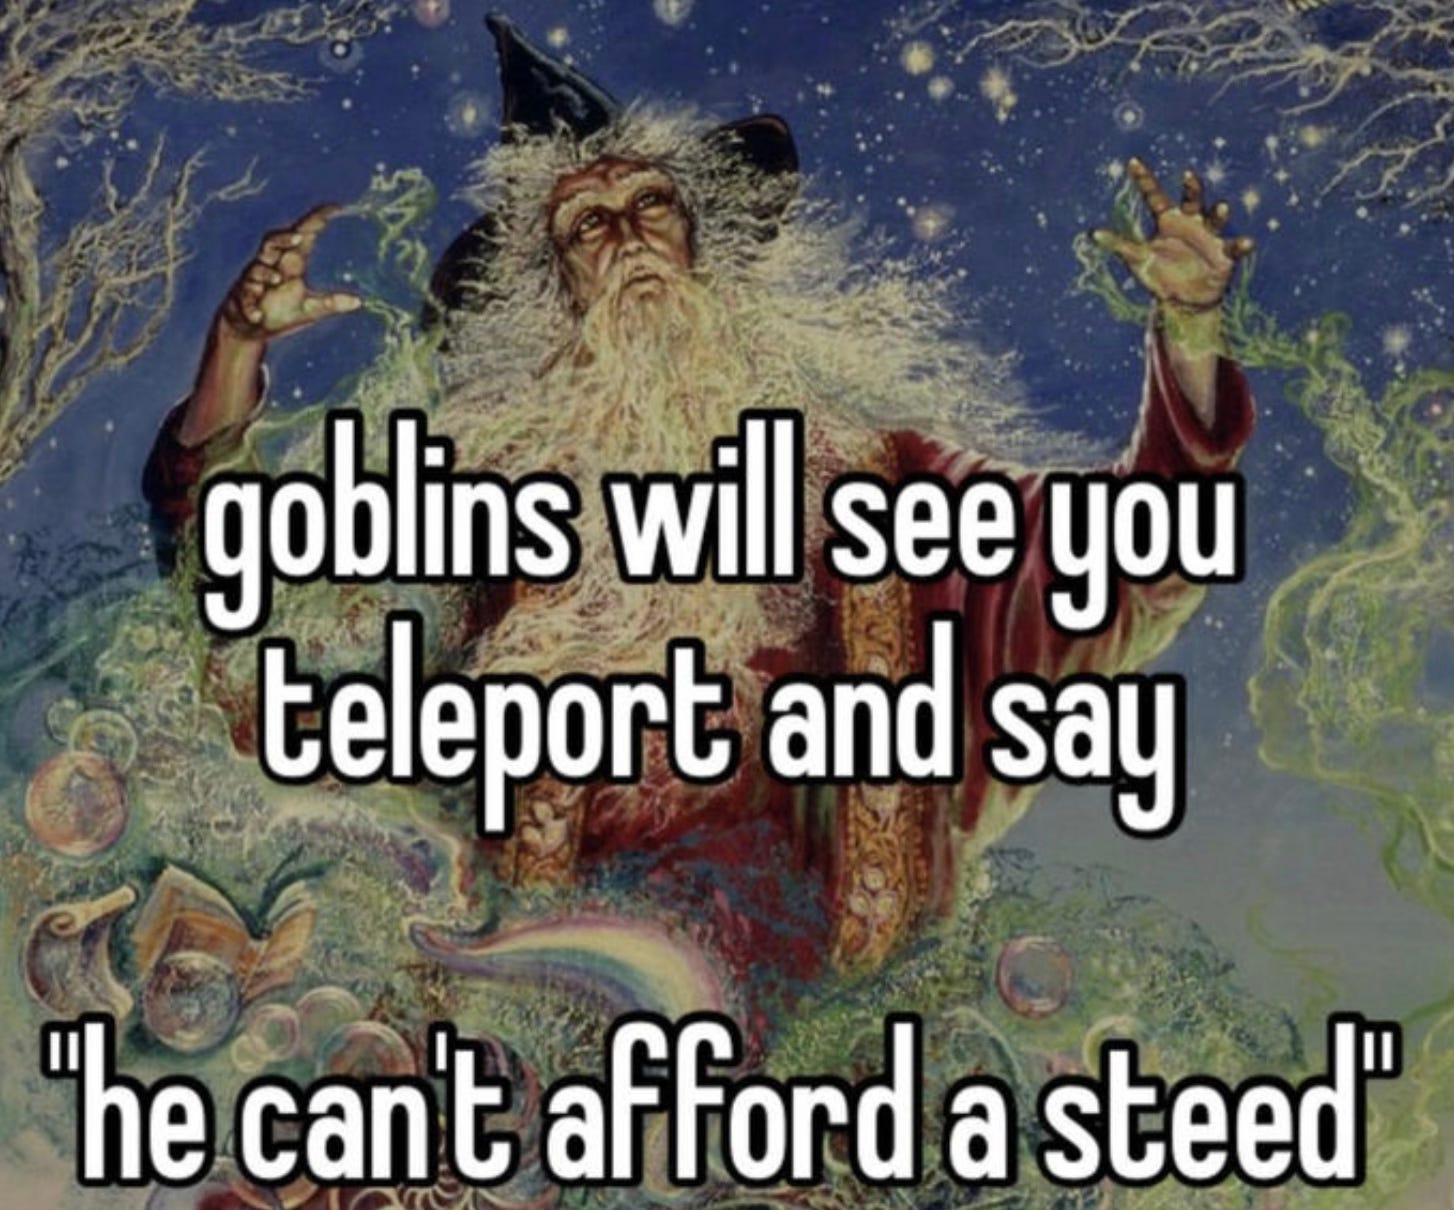 The words "goblins will see you teleport and say he can't afford a steed" over a bearded wizard casting a spell.